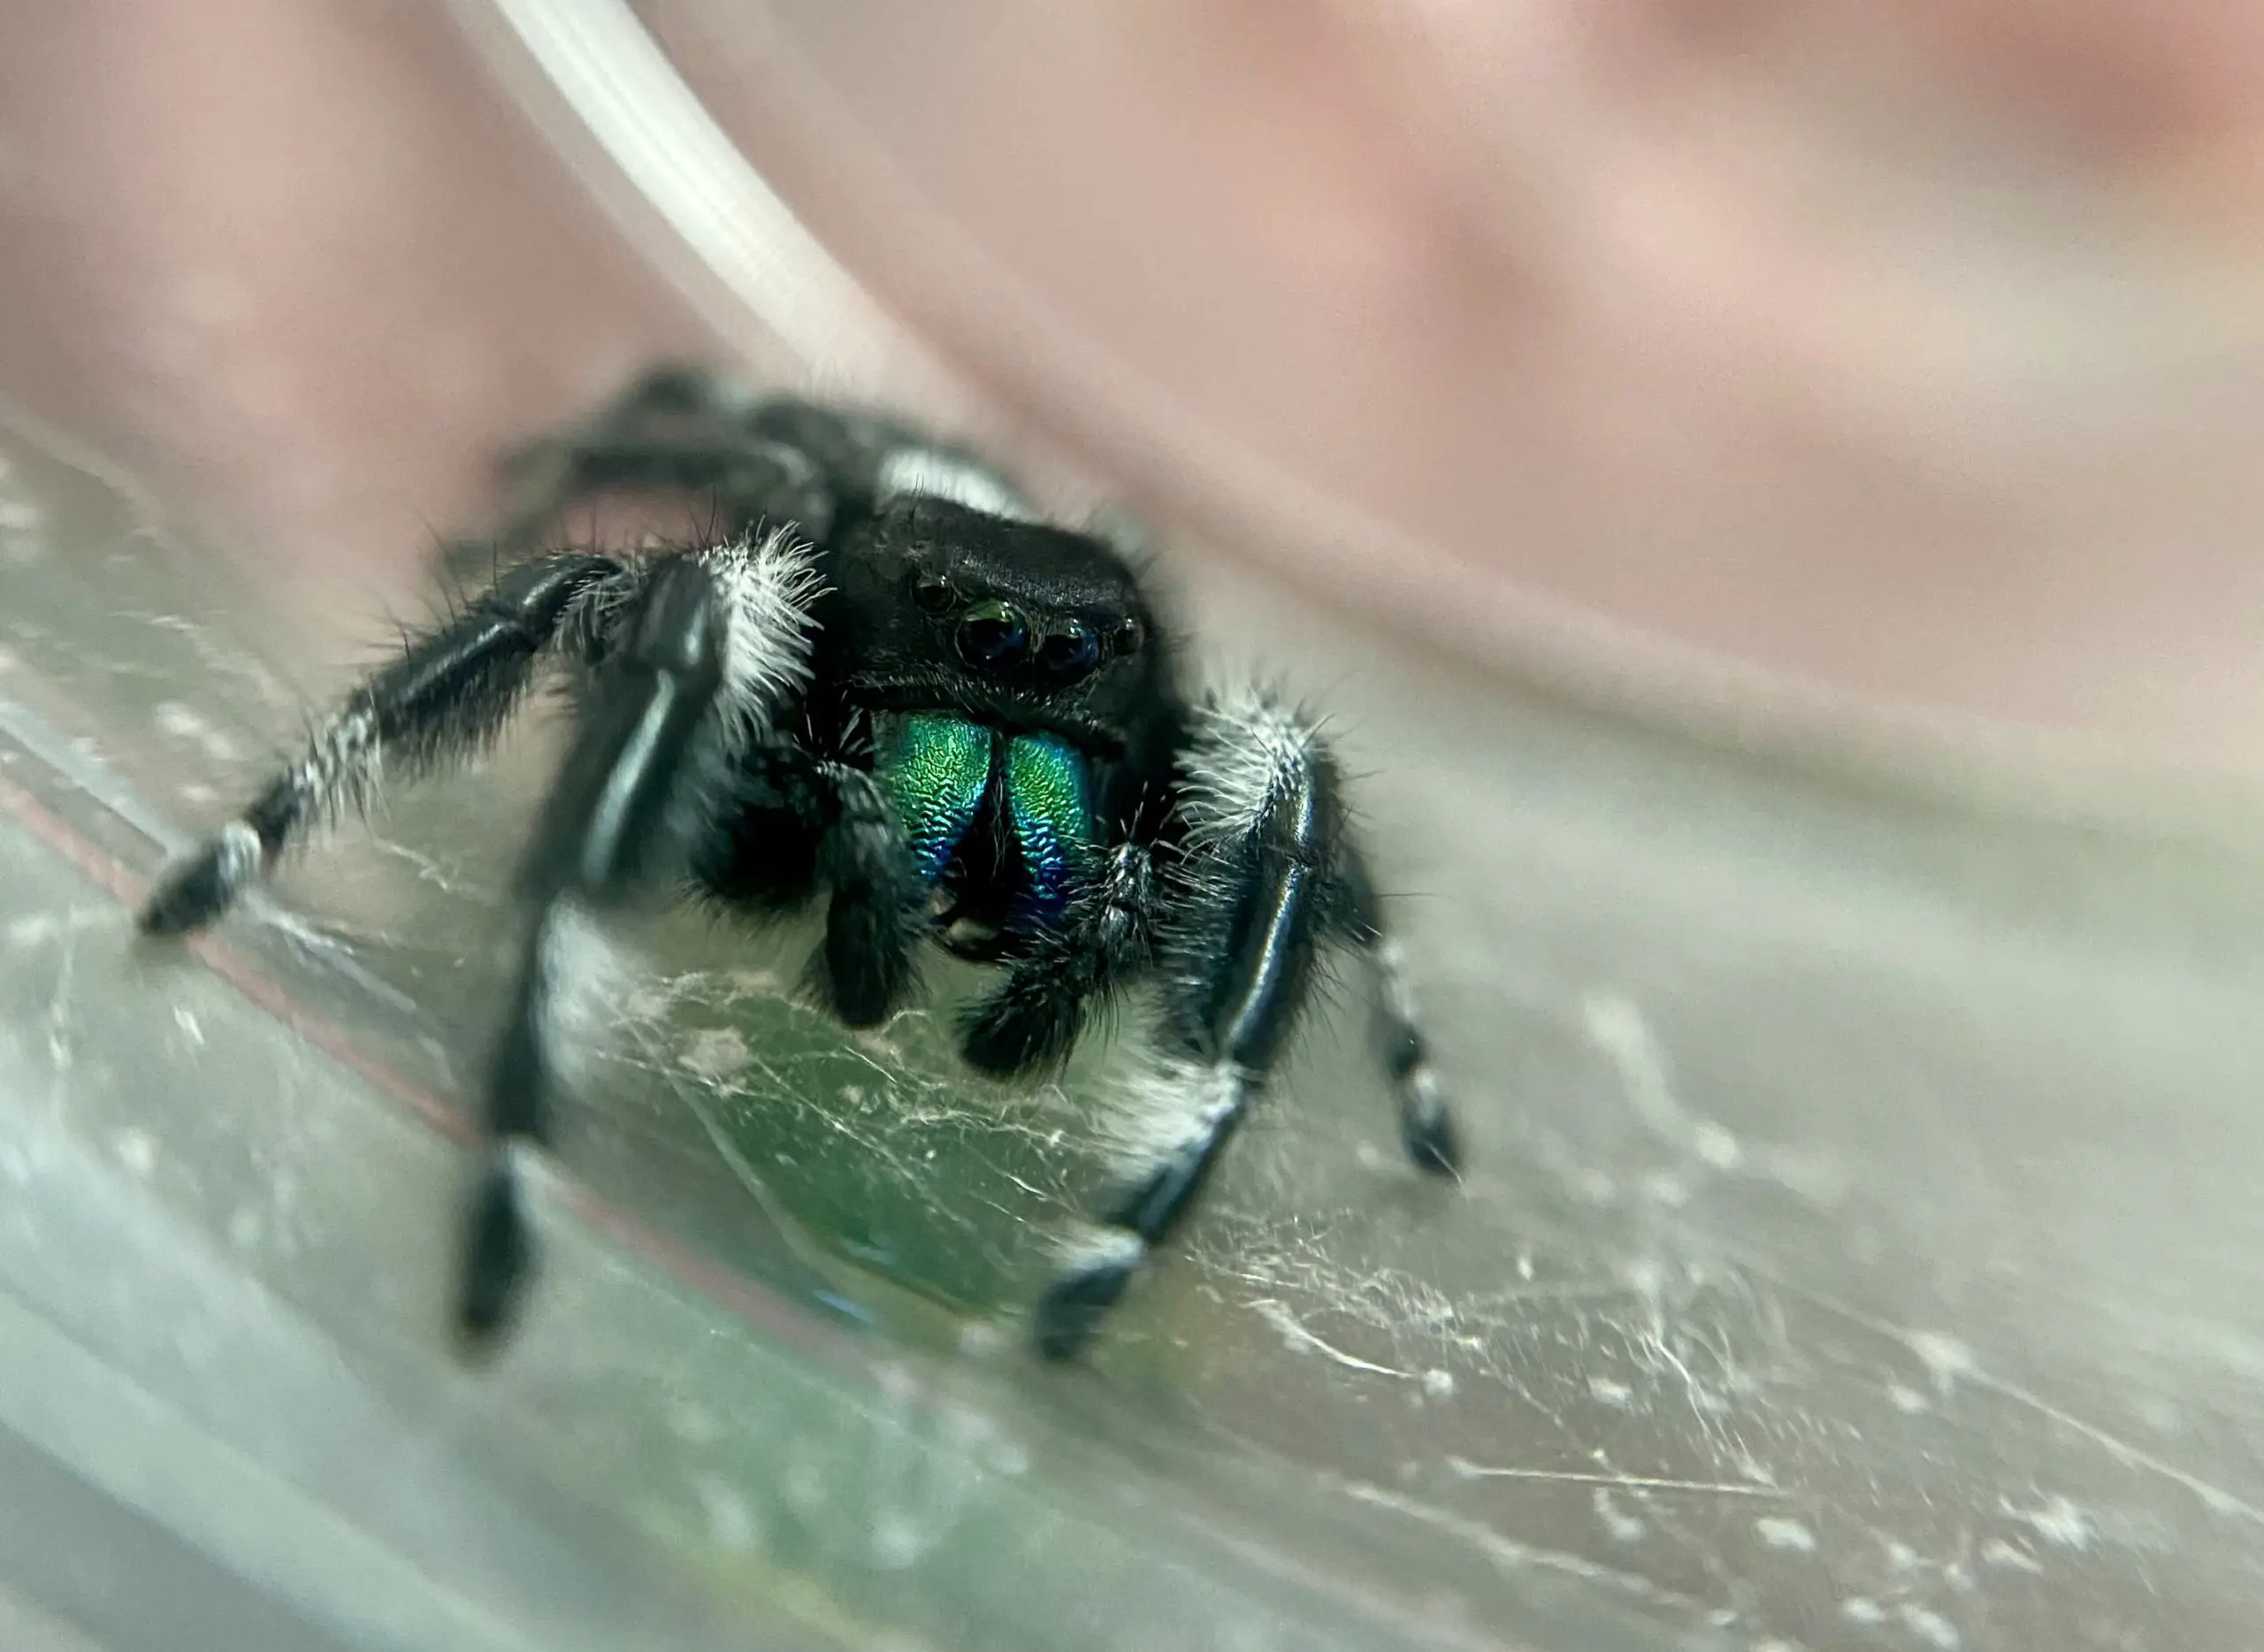 jumping spider pedipalps